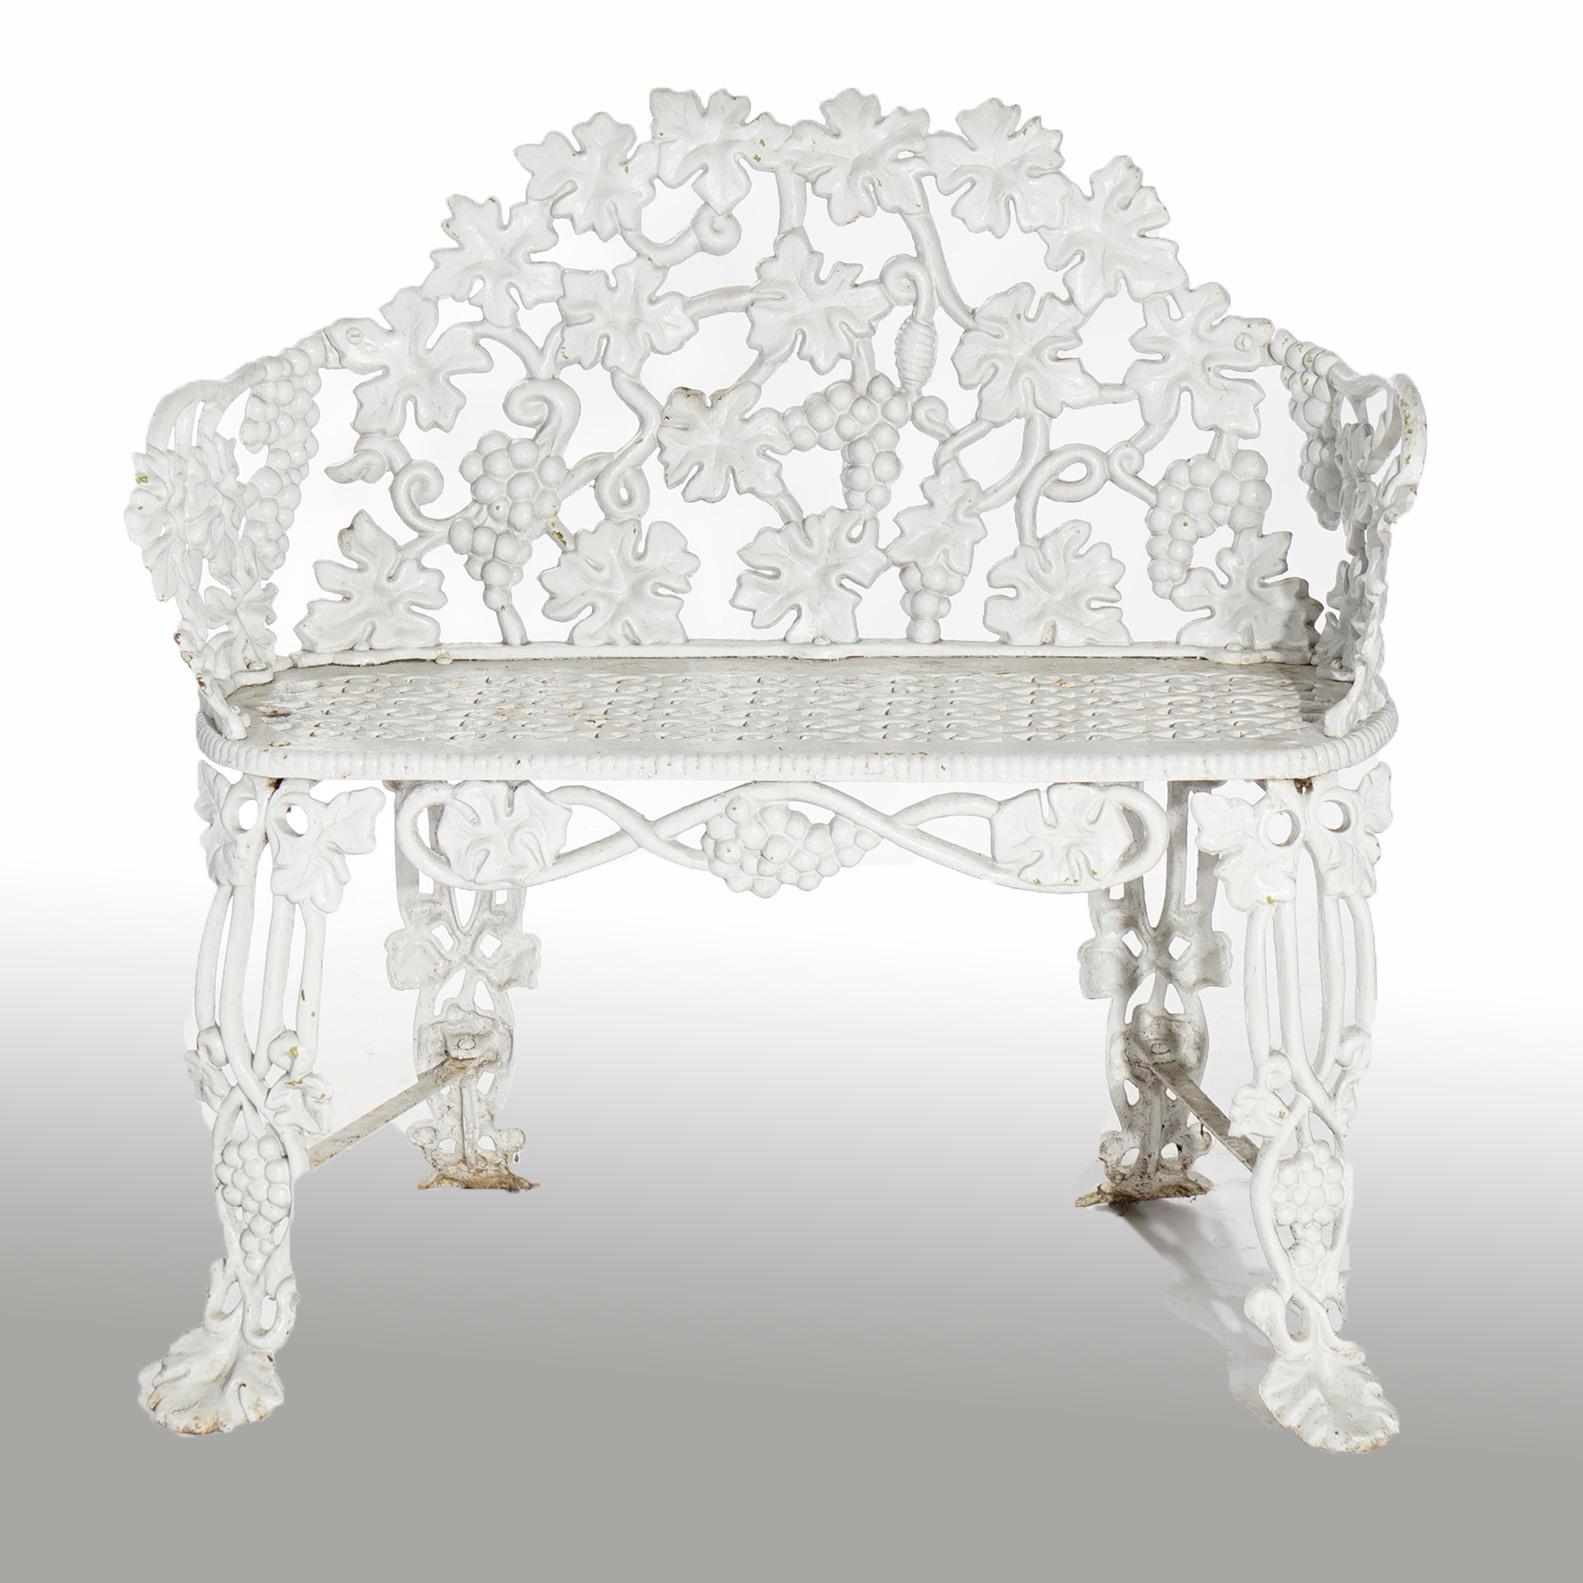 An antique garden bench offers cast iron construction in grape and leaf pattern, painted white, c1940.

Measures- 32.5''H x 32.5''W x 19.5''D; SH: 17.25''

Catalogue Note: Ask about DISCOUNTED DELIVERY RATES available to most regions within 1,500